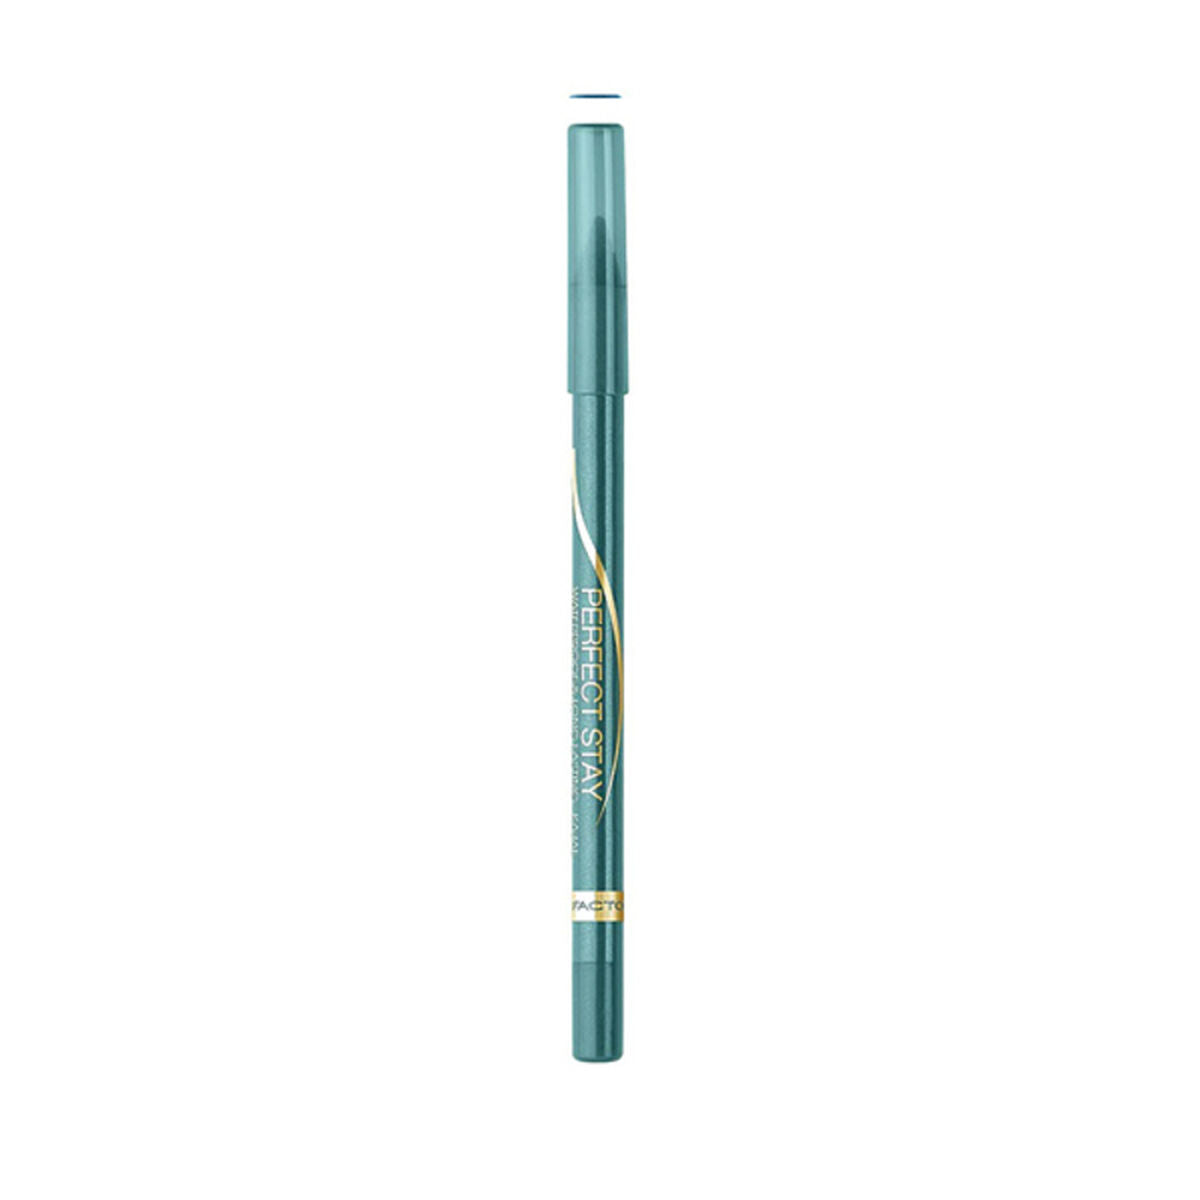 Eyeliner Perfect Stay Factor Max